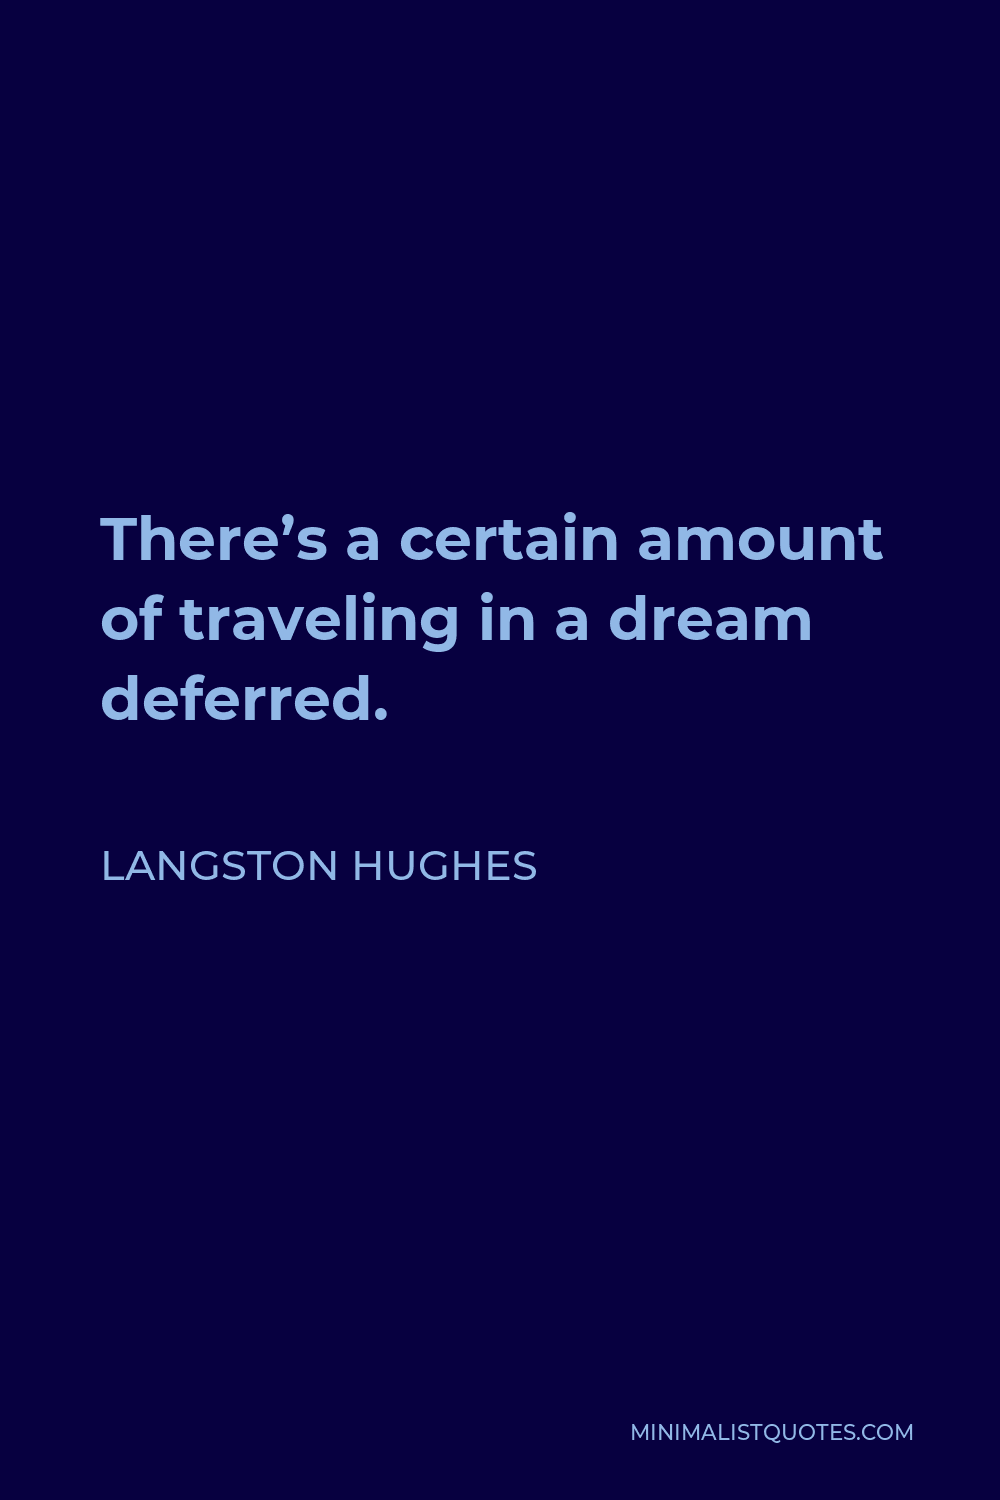 Langston Hughes Quote - There’s a certain amount of traveling in a dream deferred.